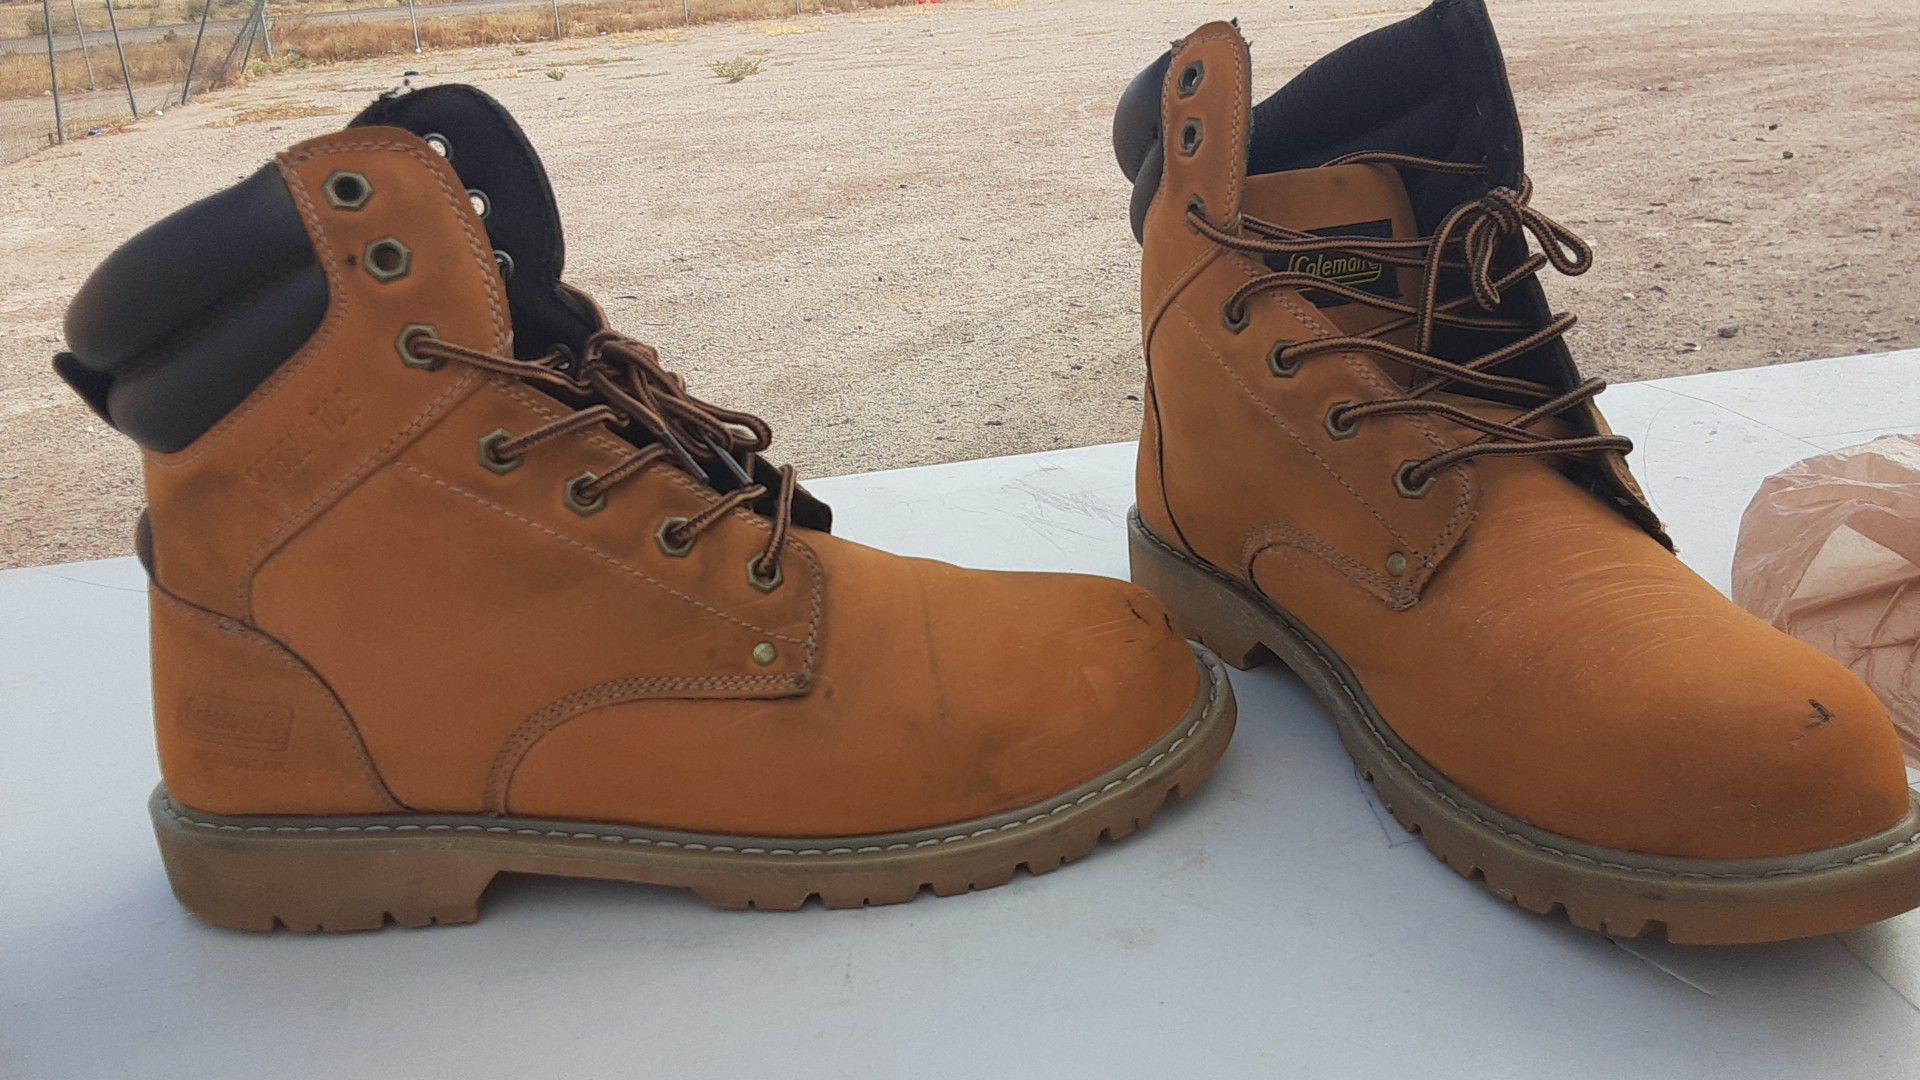 Size 12 coleman work boots they have a small tear in front